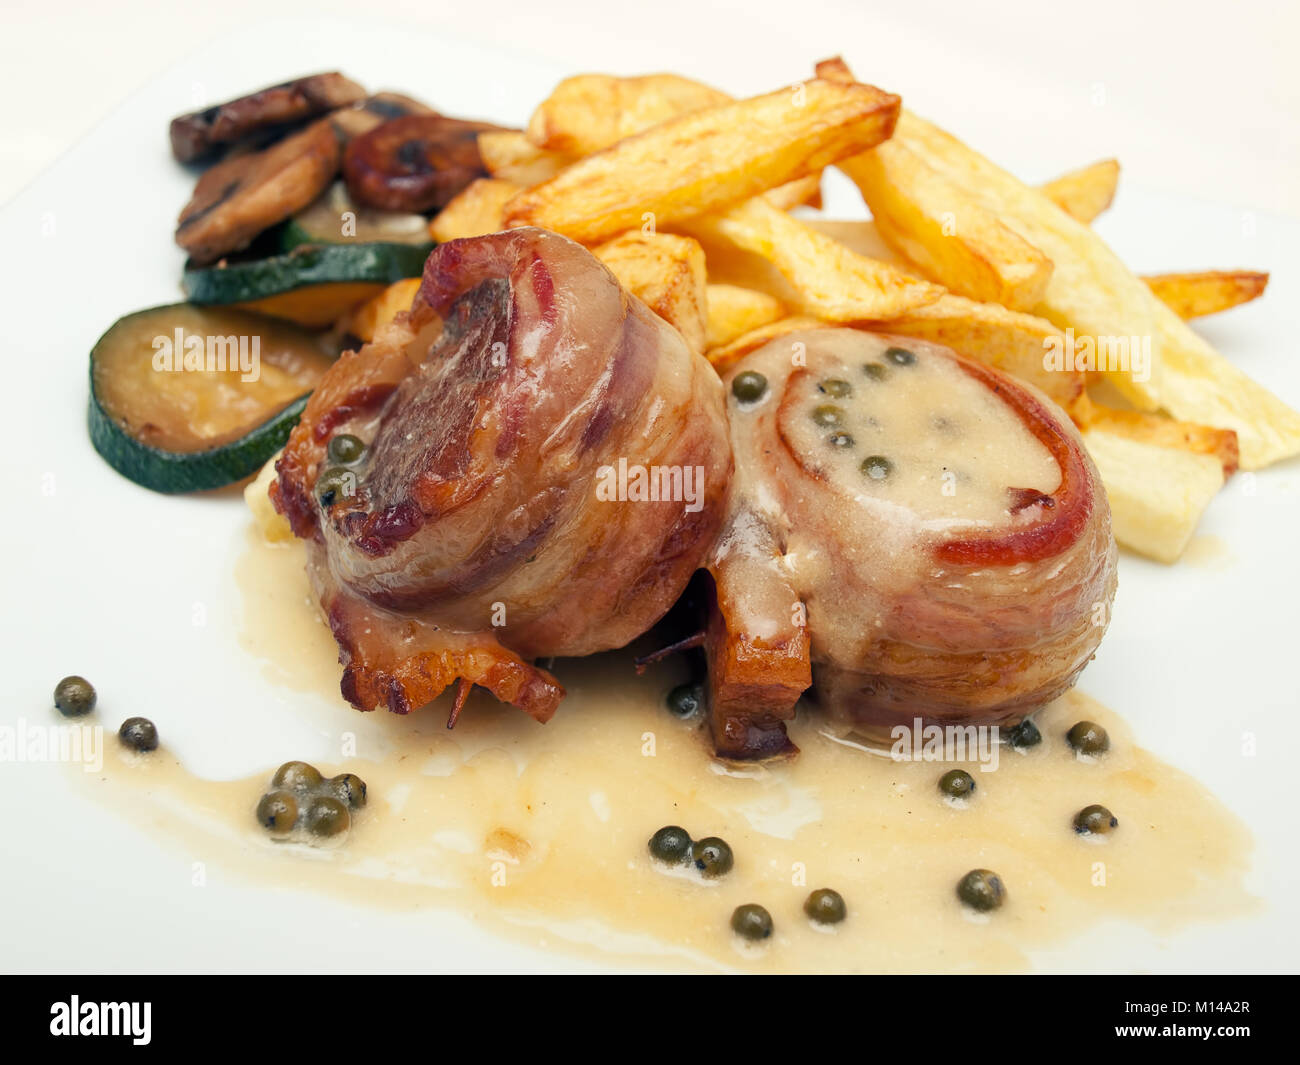 Closeup view of tasty bacon wrapped steaks with green pepper sauce, french fry potatoes and roasted vegetables. Stock Photo